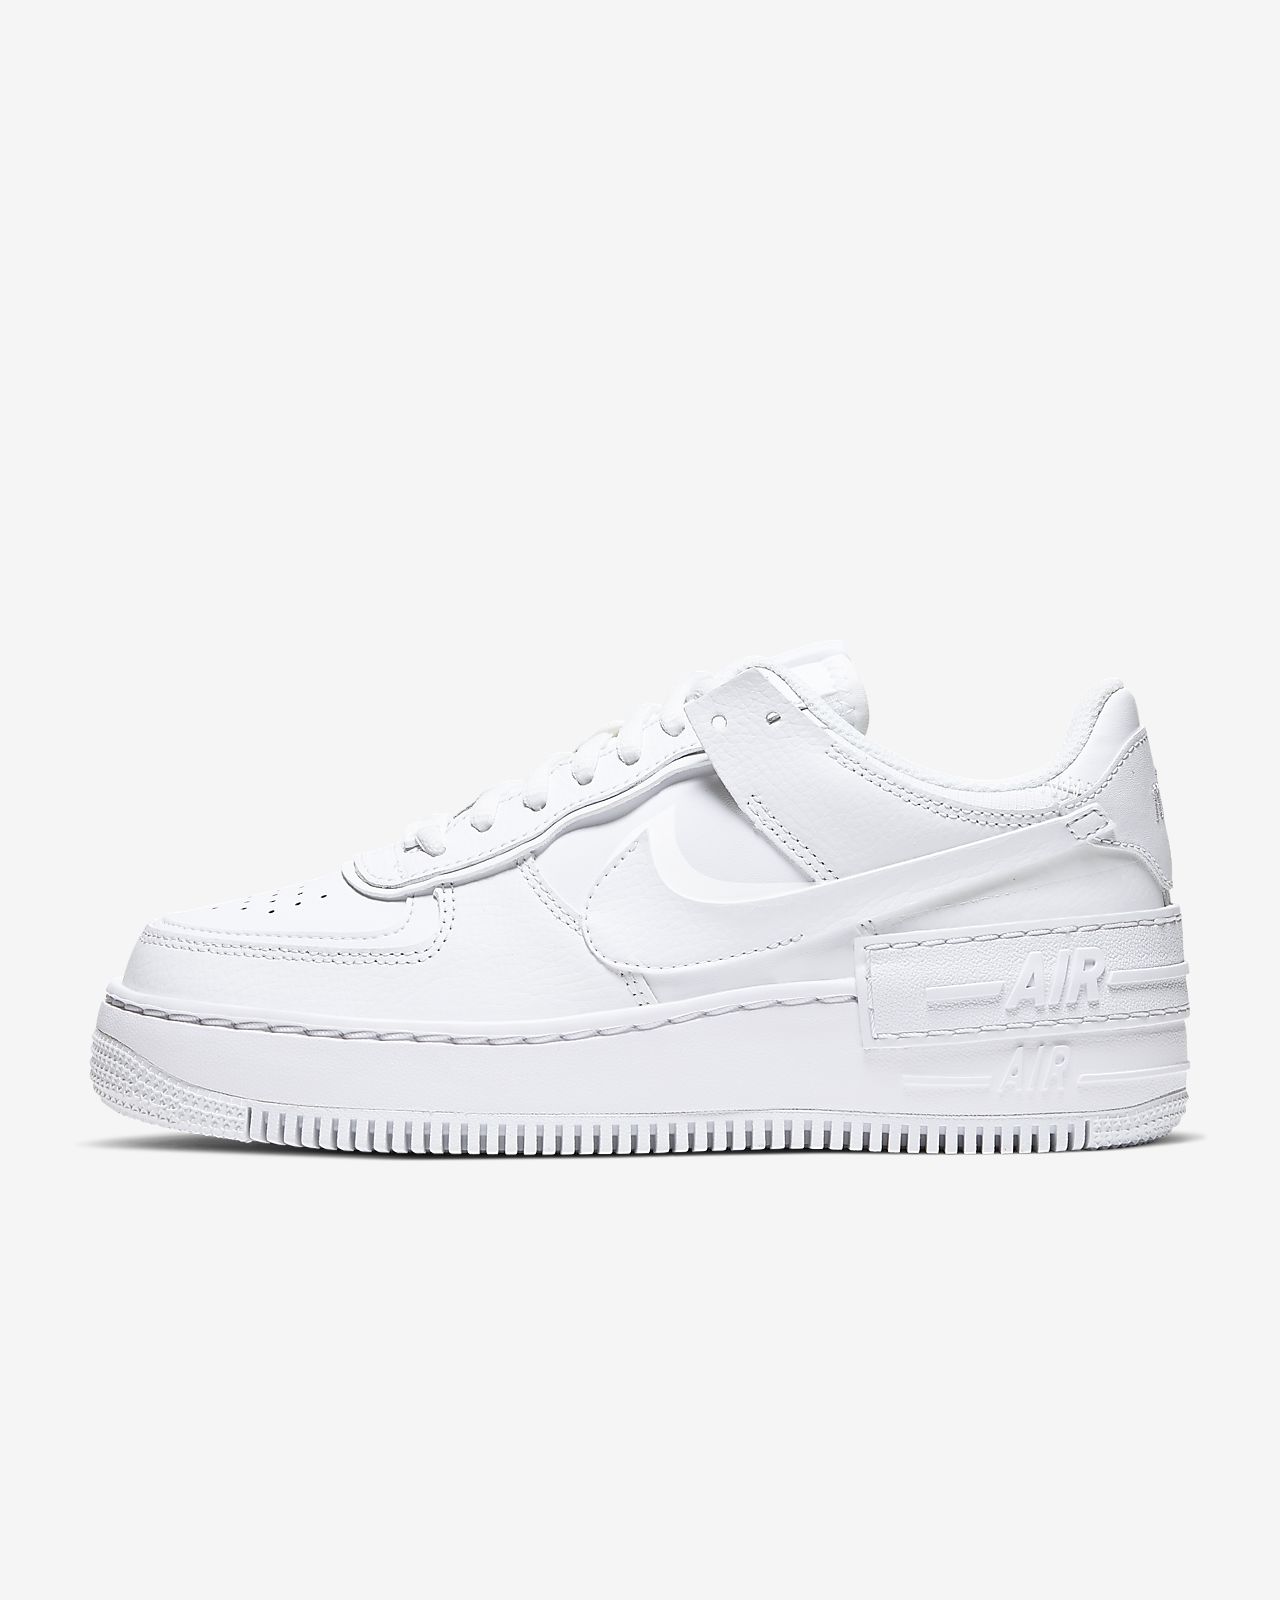 nike air force costo